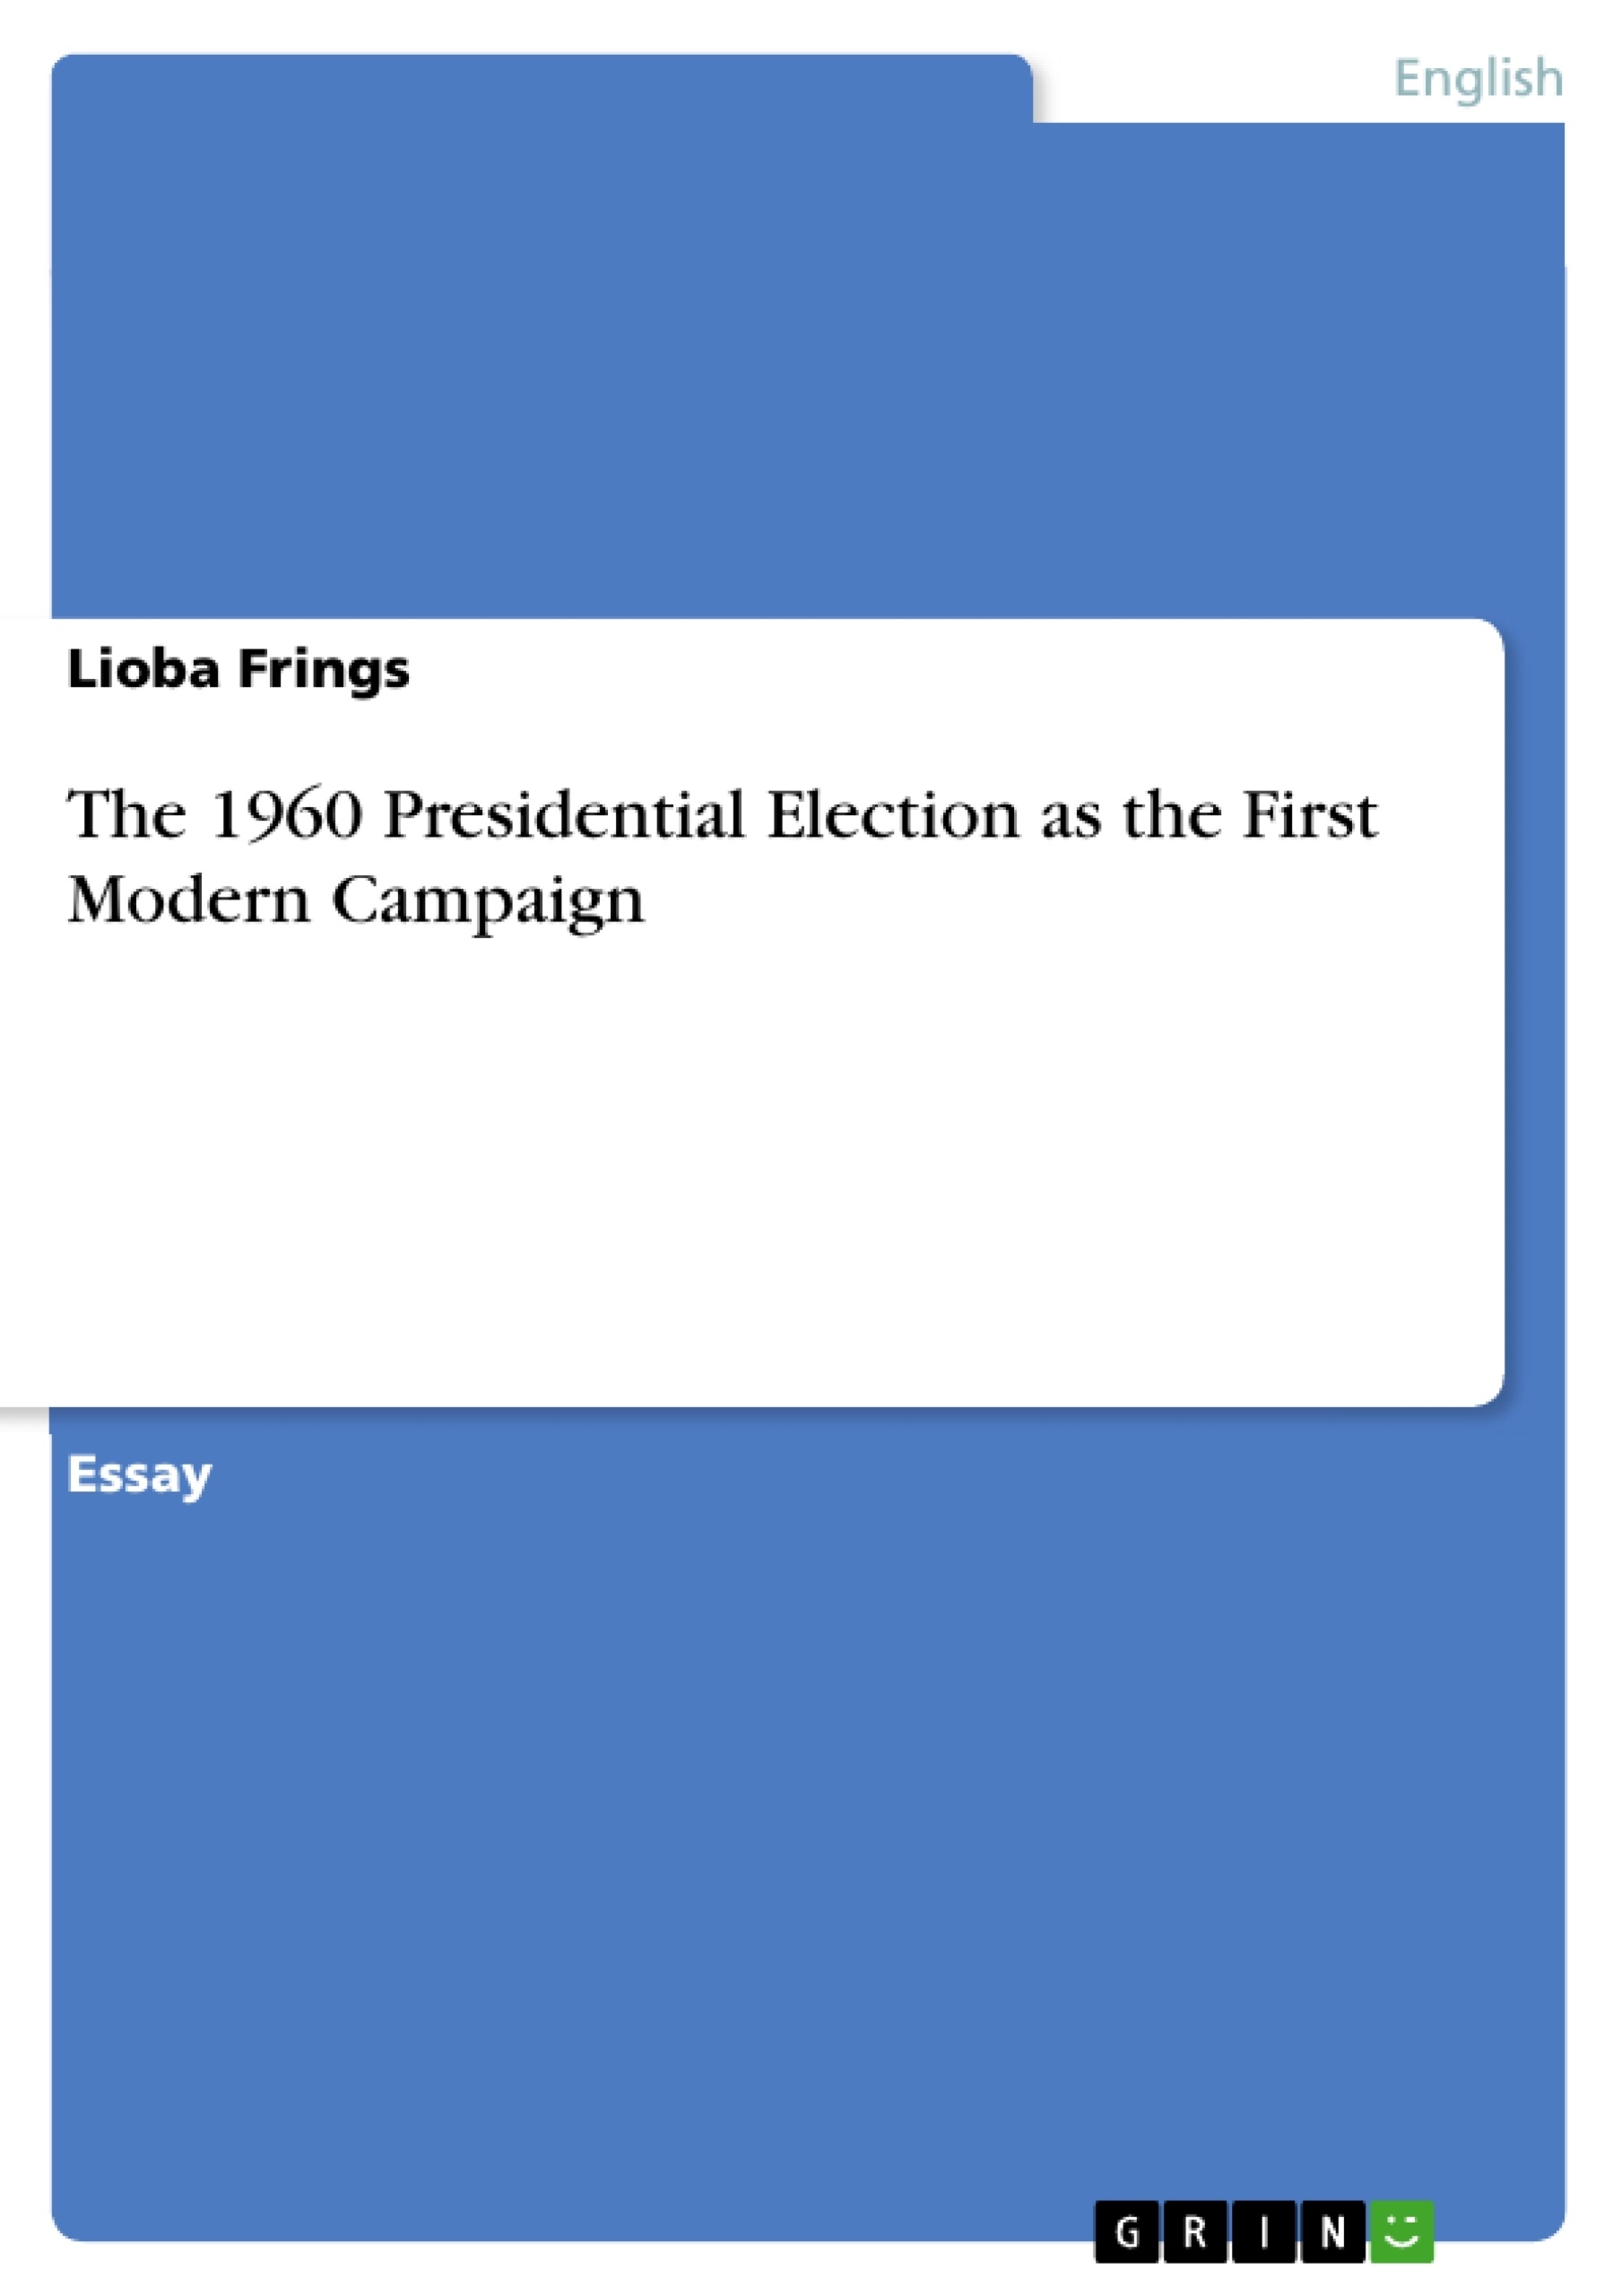 Titre: The 1960 Presidential Election as the First Modern Campaign